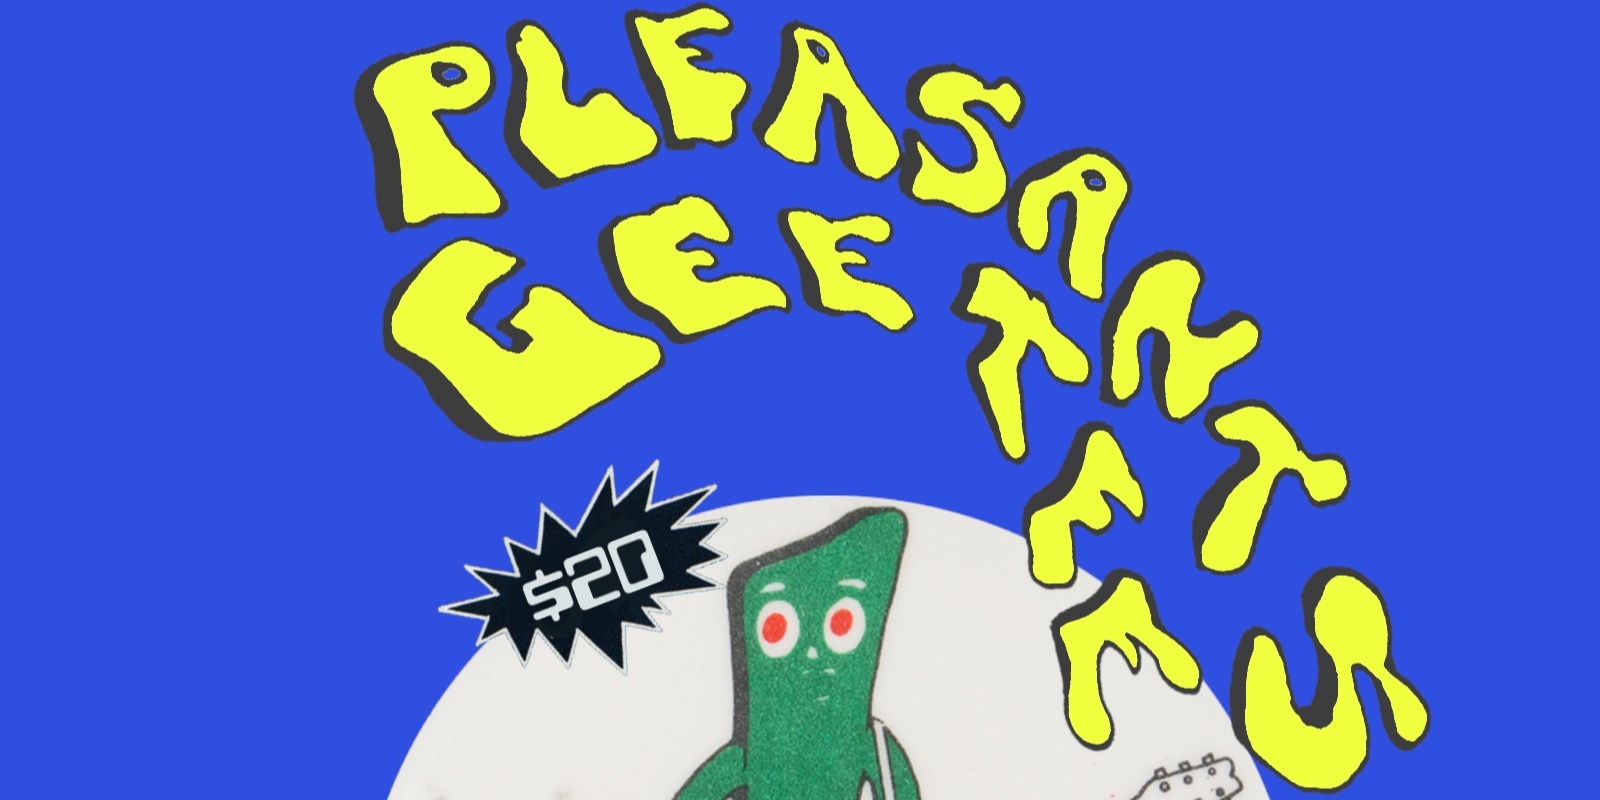 Banner image for Pleasants (WA) and GeeTee at PBC 